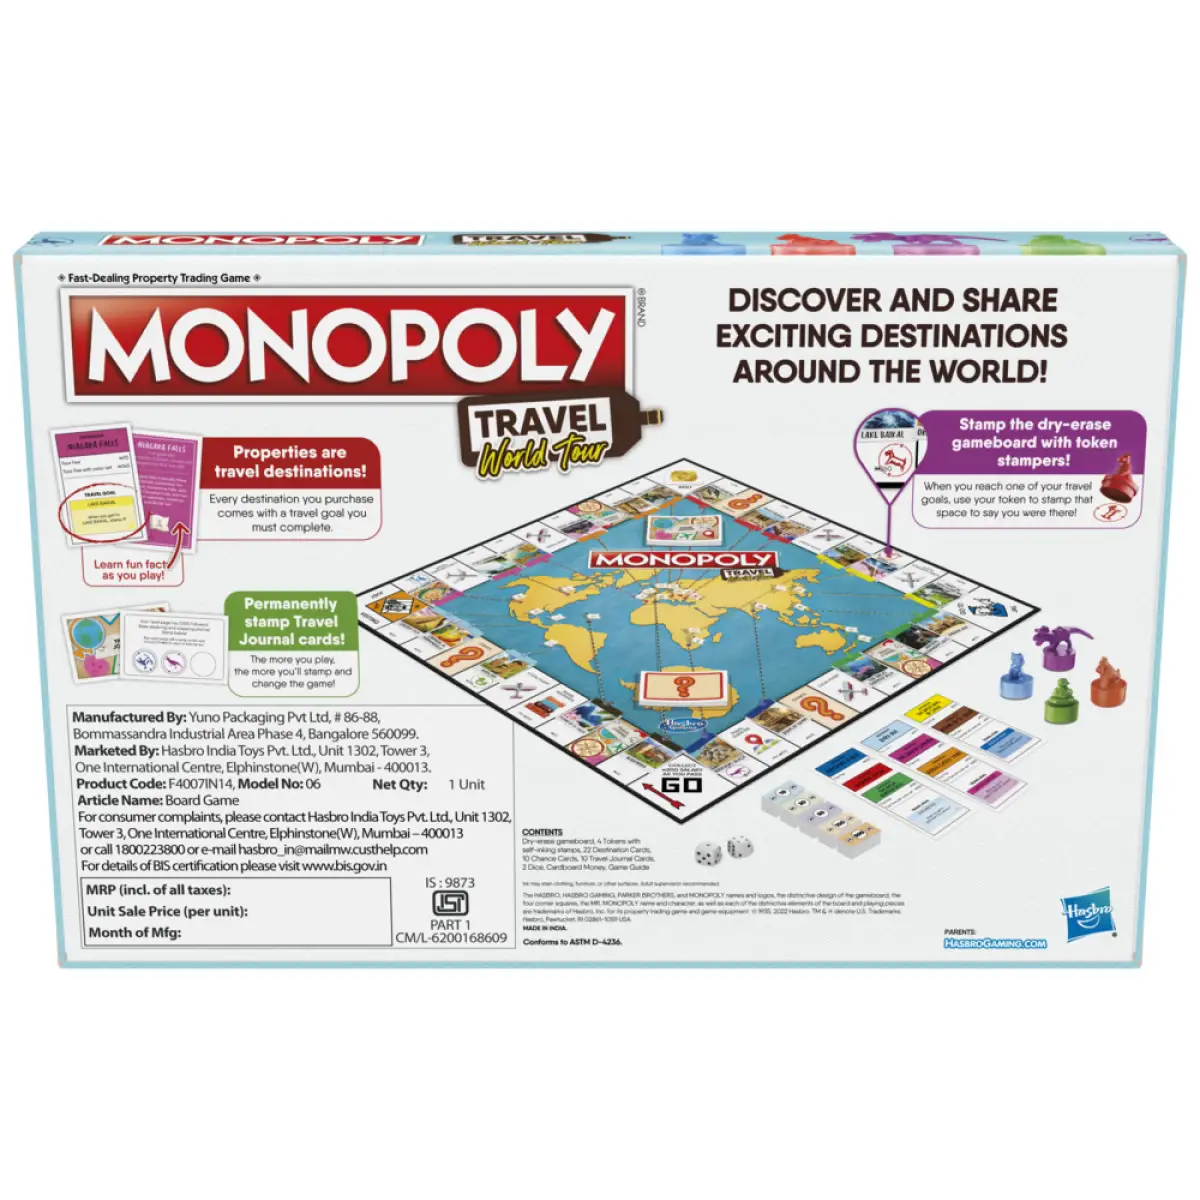 Monopoly Travel World Tour Monopoly Board Game, With Token Stampers And Dry-Erase Gameboard, Board Games For Family Game Night